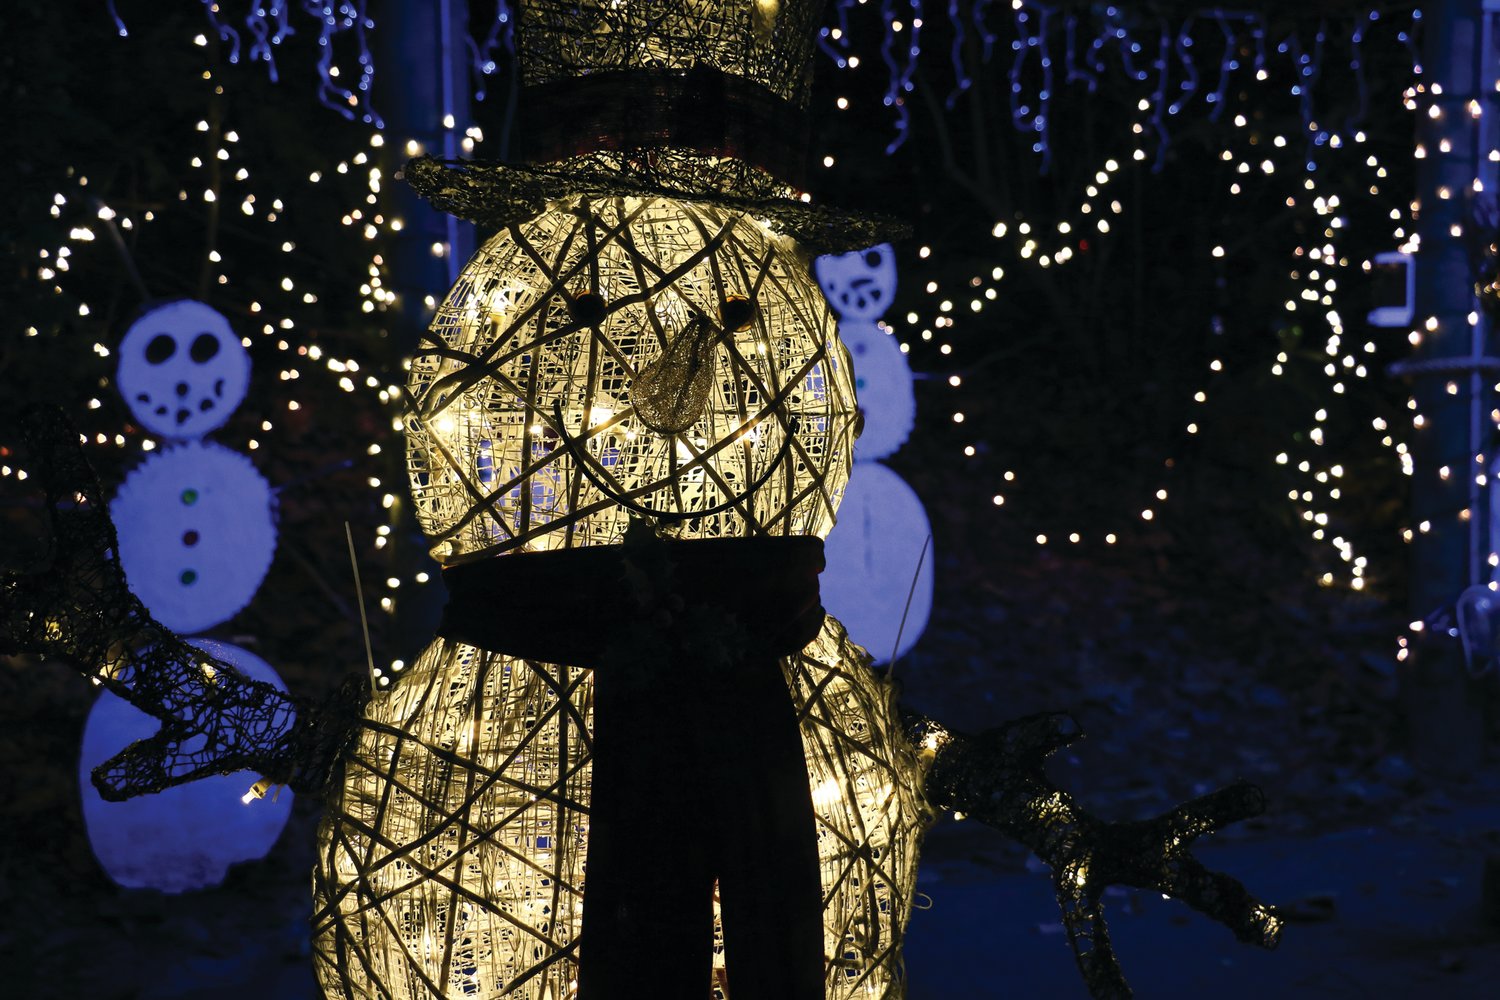 HOLIDAY SPIRIT: The Holiday Lights Spectacular at Roger Williams Park Zoo will run on select dates from Nov. 26 to Jan. 2.